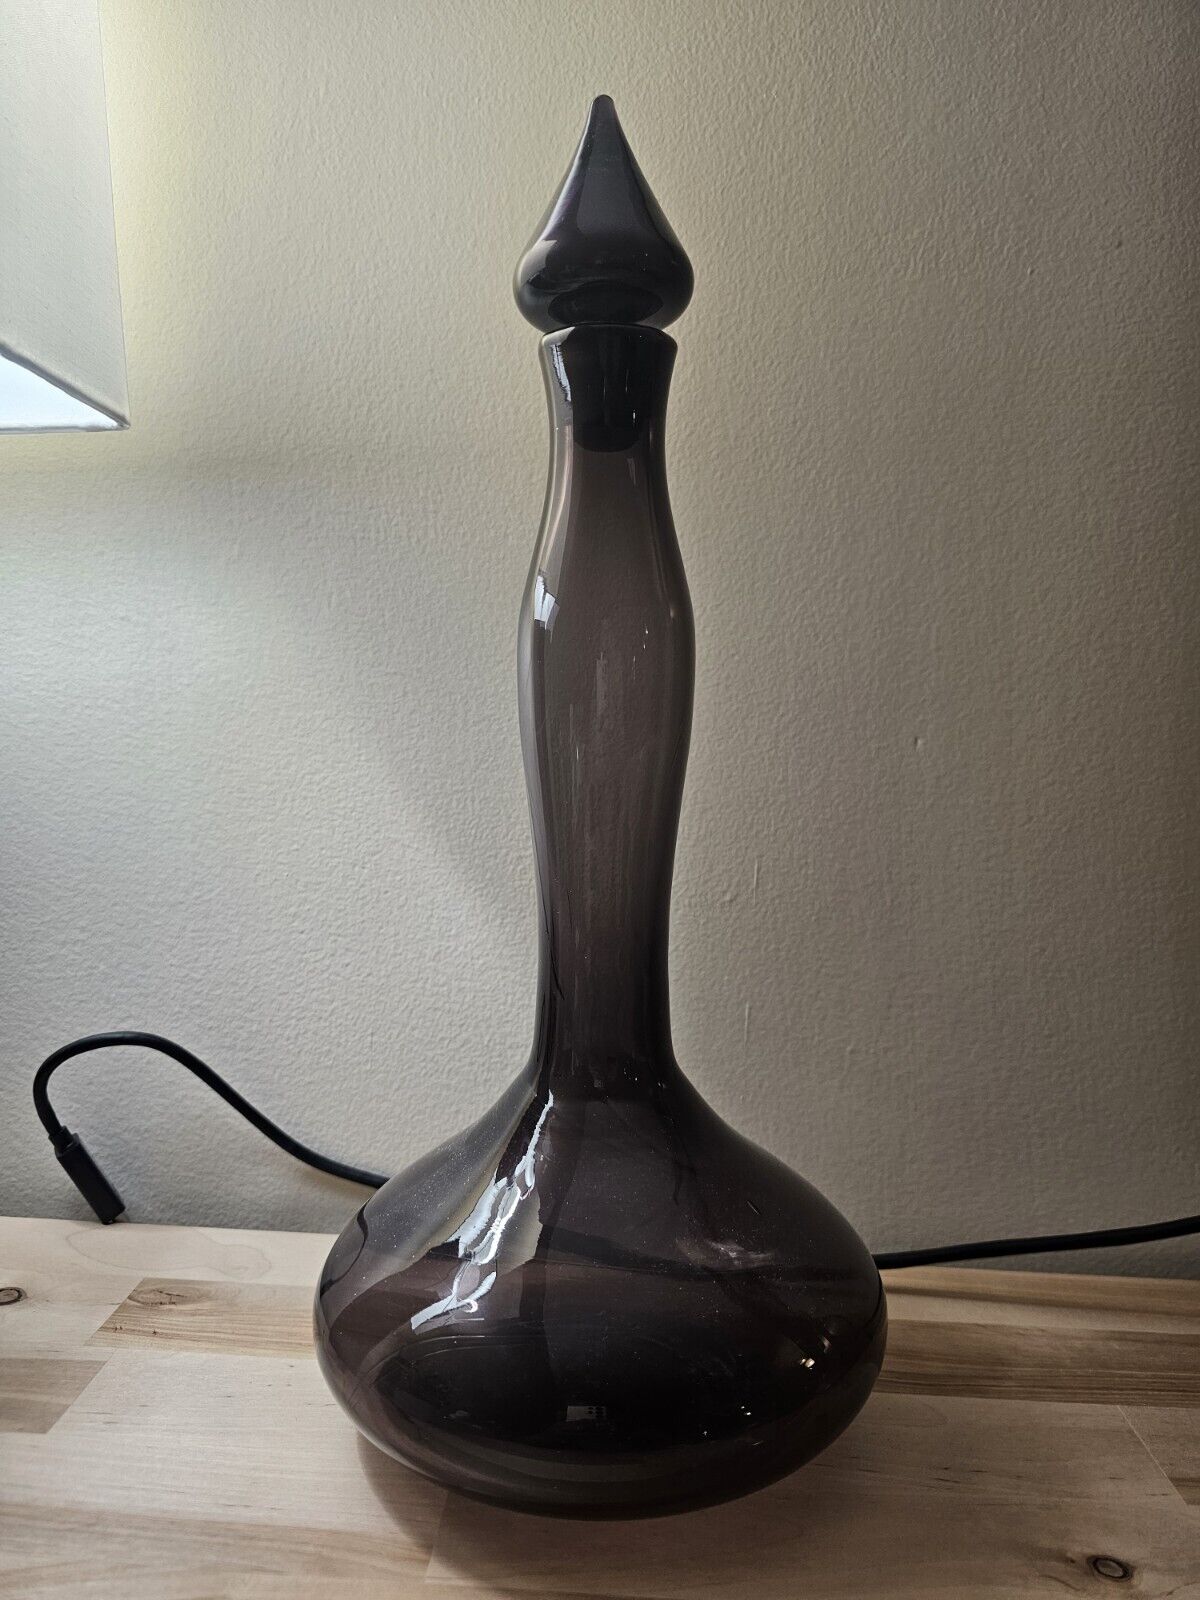 Blenko Mulberry Decanter 5815 by Wayne Husted